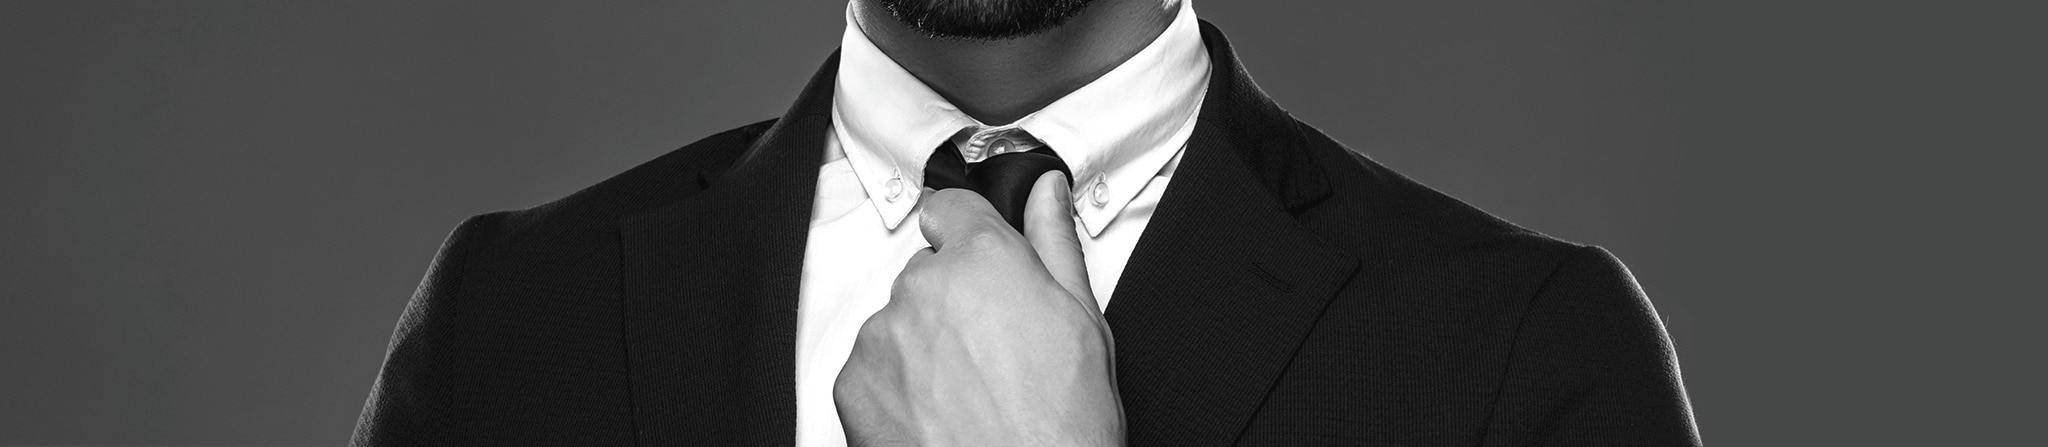 Close up of a man’s suit jacket, shirt and tie teaser.